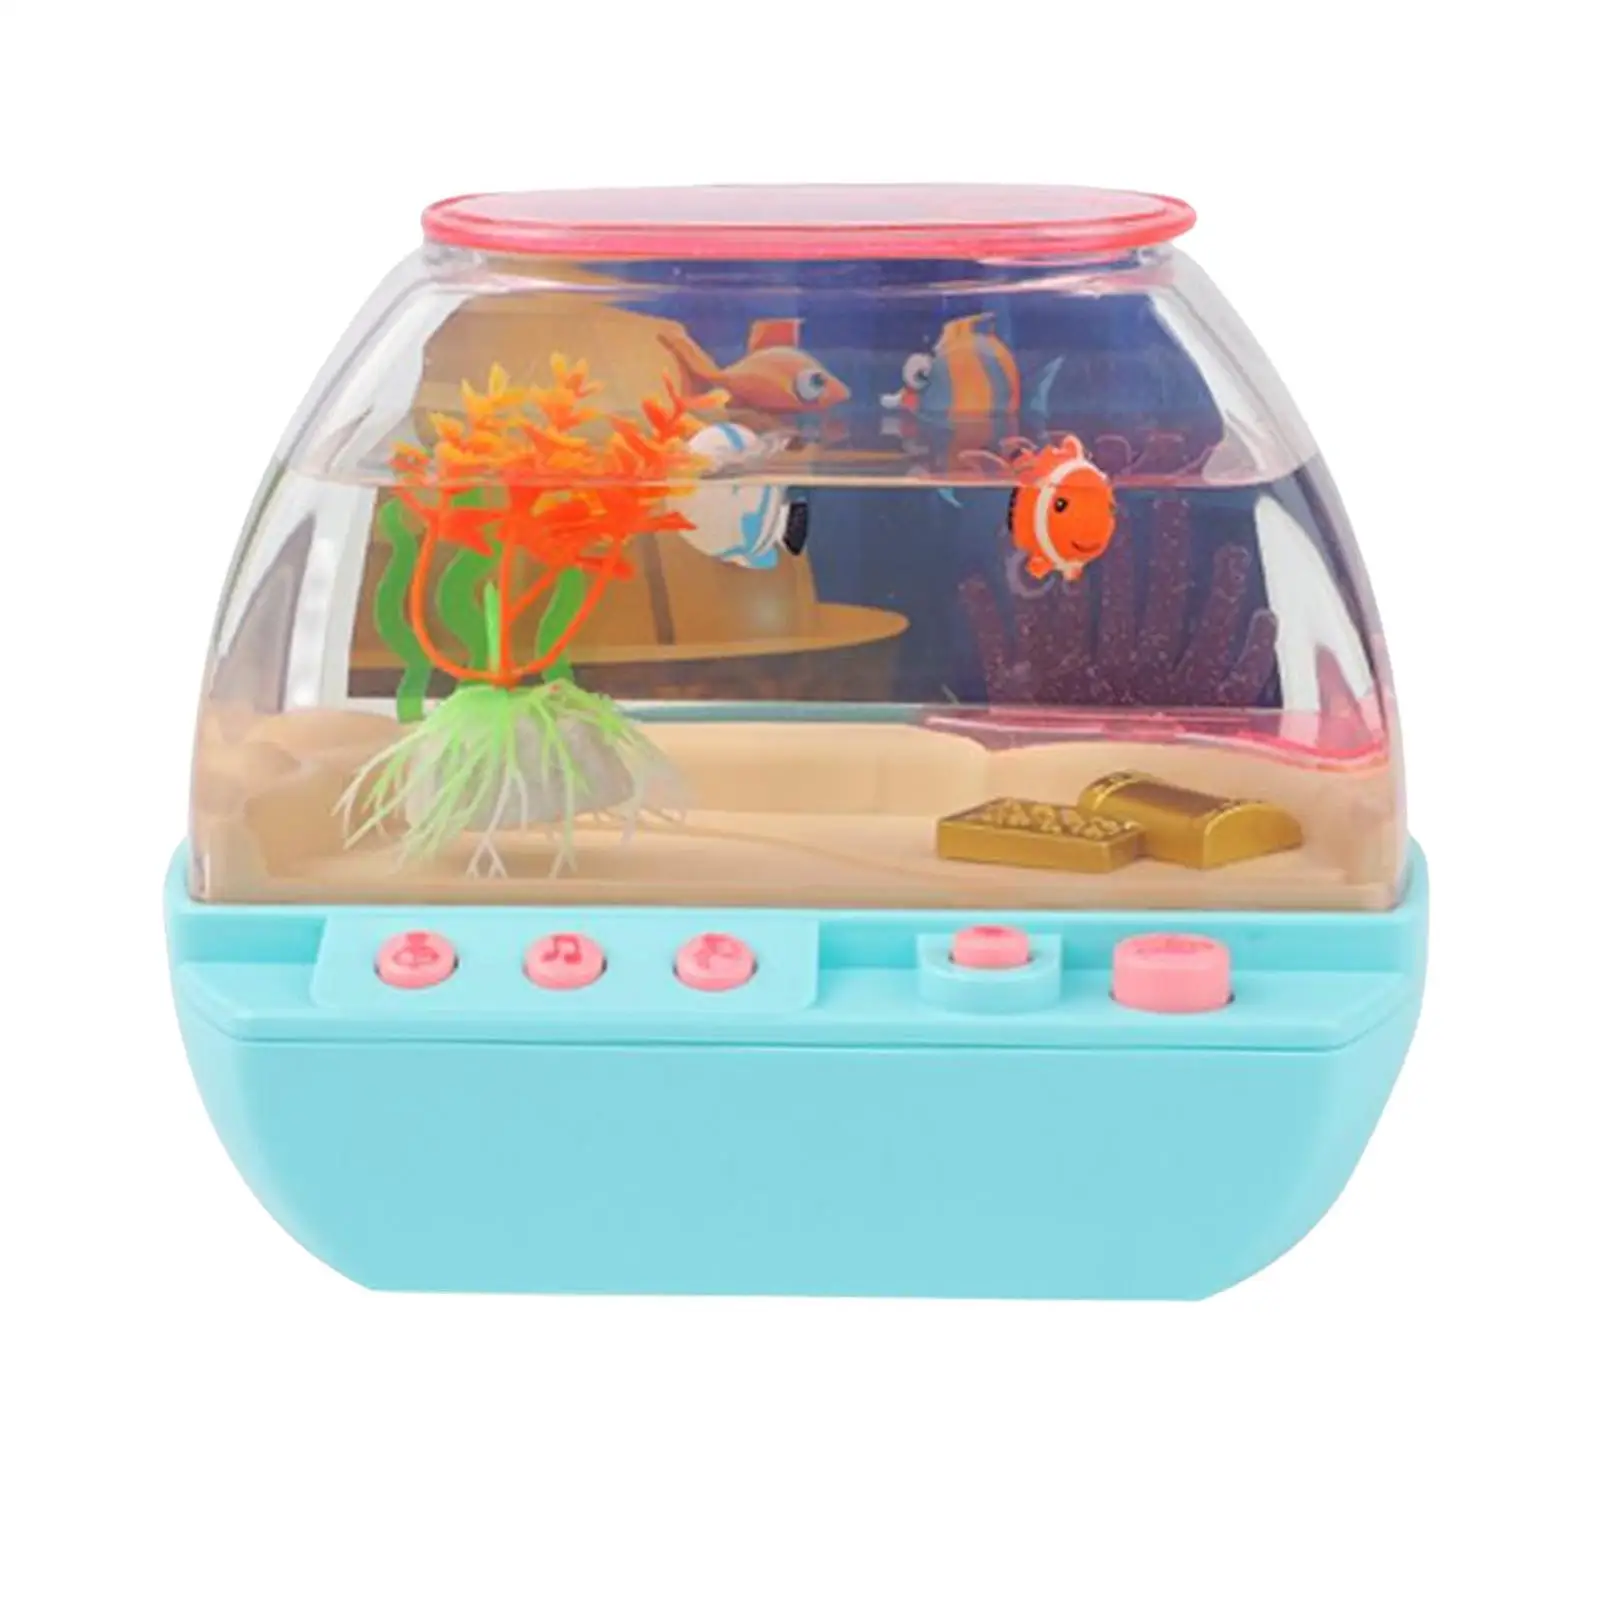 Aquarium Toys Electrified with Light with Music Mini with Moving Fish  Artificial Fish Tank Play House For Tabletop Home